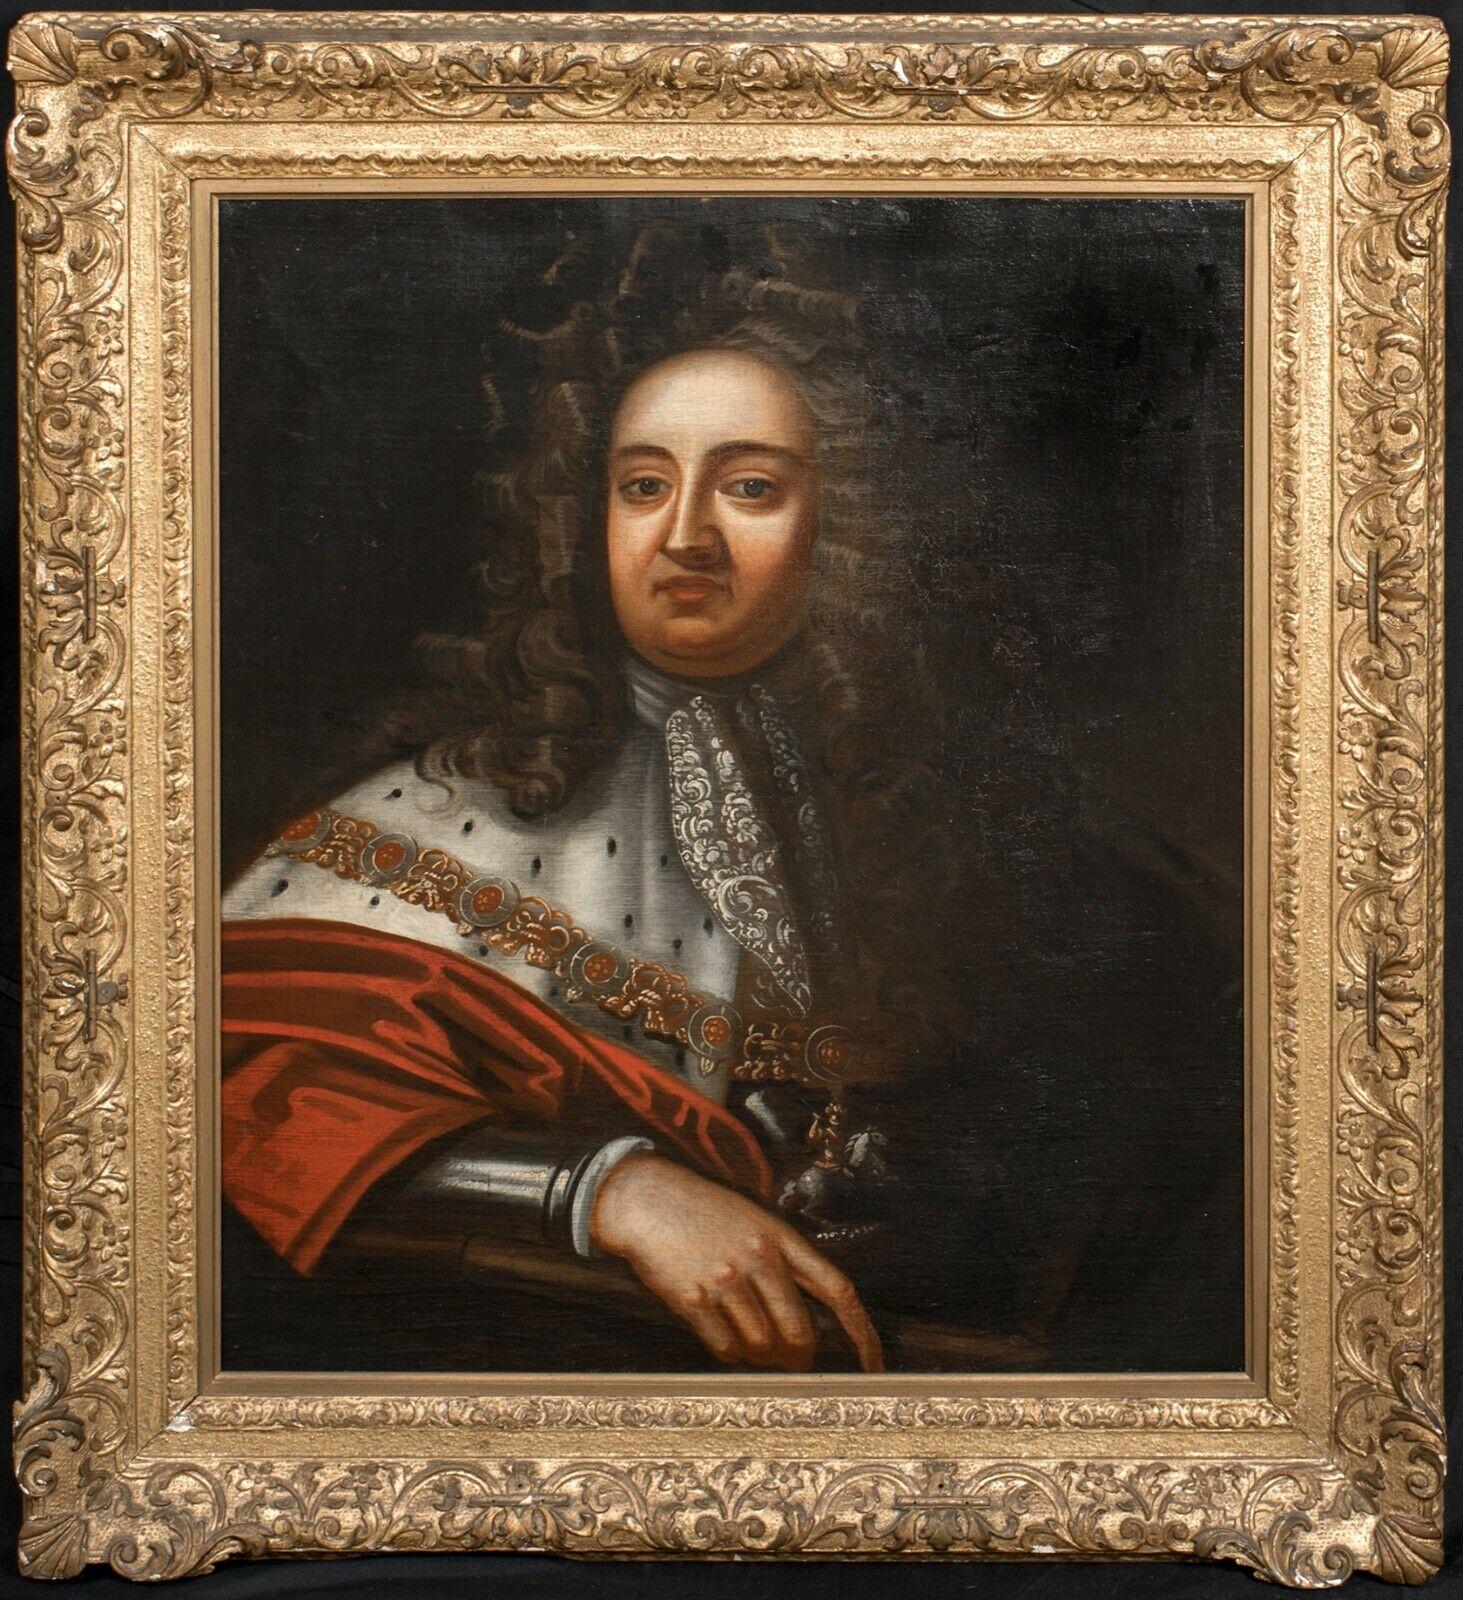 Portrait Of Prince George Of Denmark and Norway, Duke Of Cumberland (1653-1708)